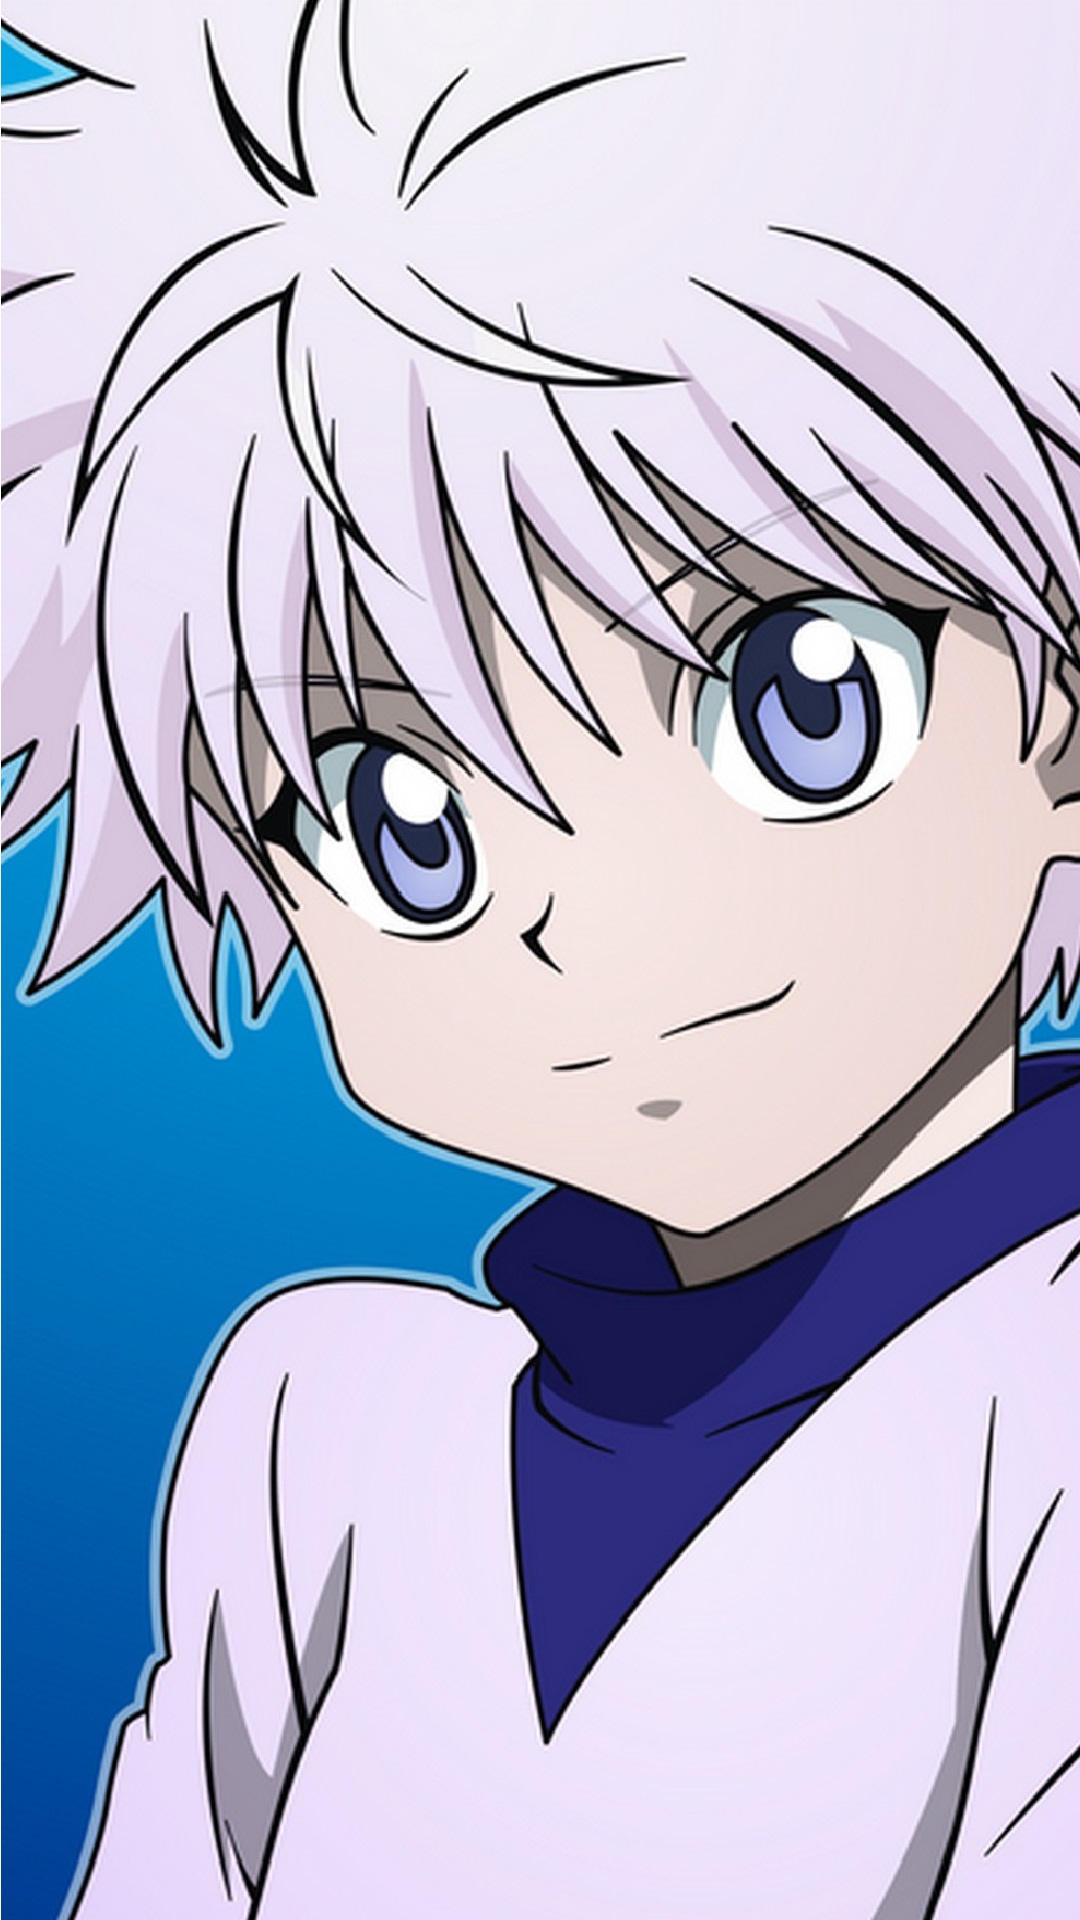 Killua Phone Wallpaper with high-resolution 1080x1920 pixel. Download all Mobile Wallpapers and Use them as wallpapers for your iPhone, Tablet, iPad, Android and other mobile devices